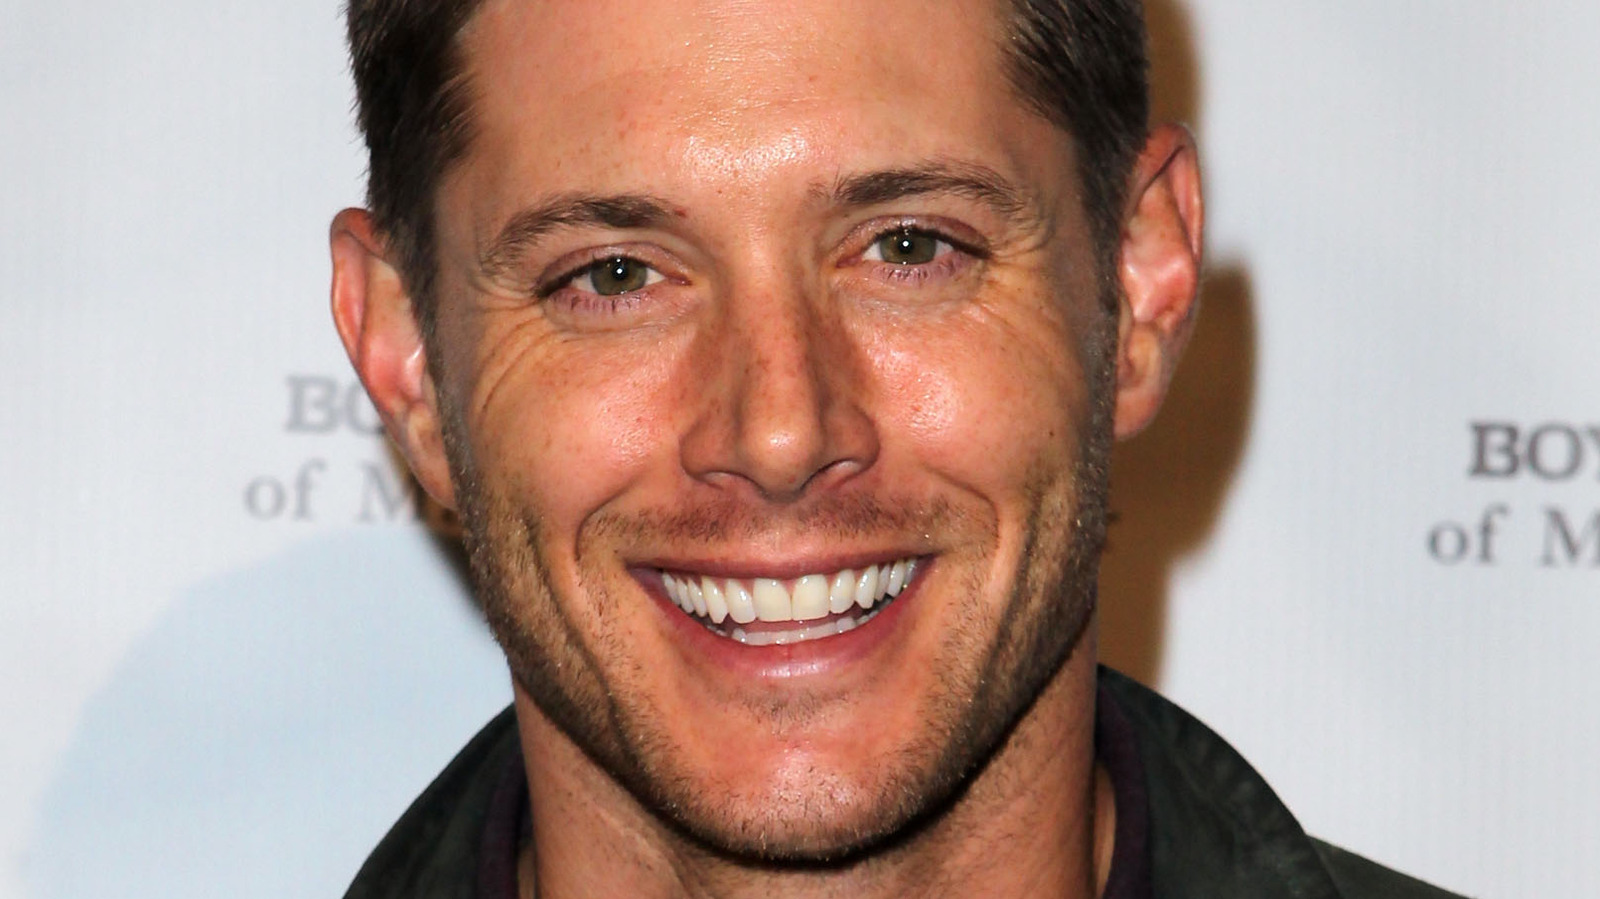 Is Jensen Ackles as hot in real life as he is on screen  Quora